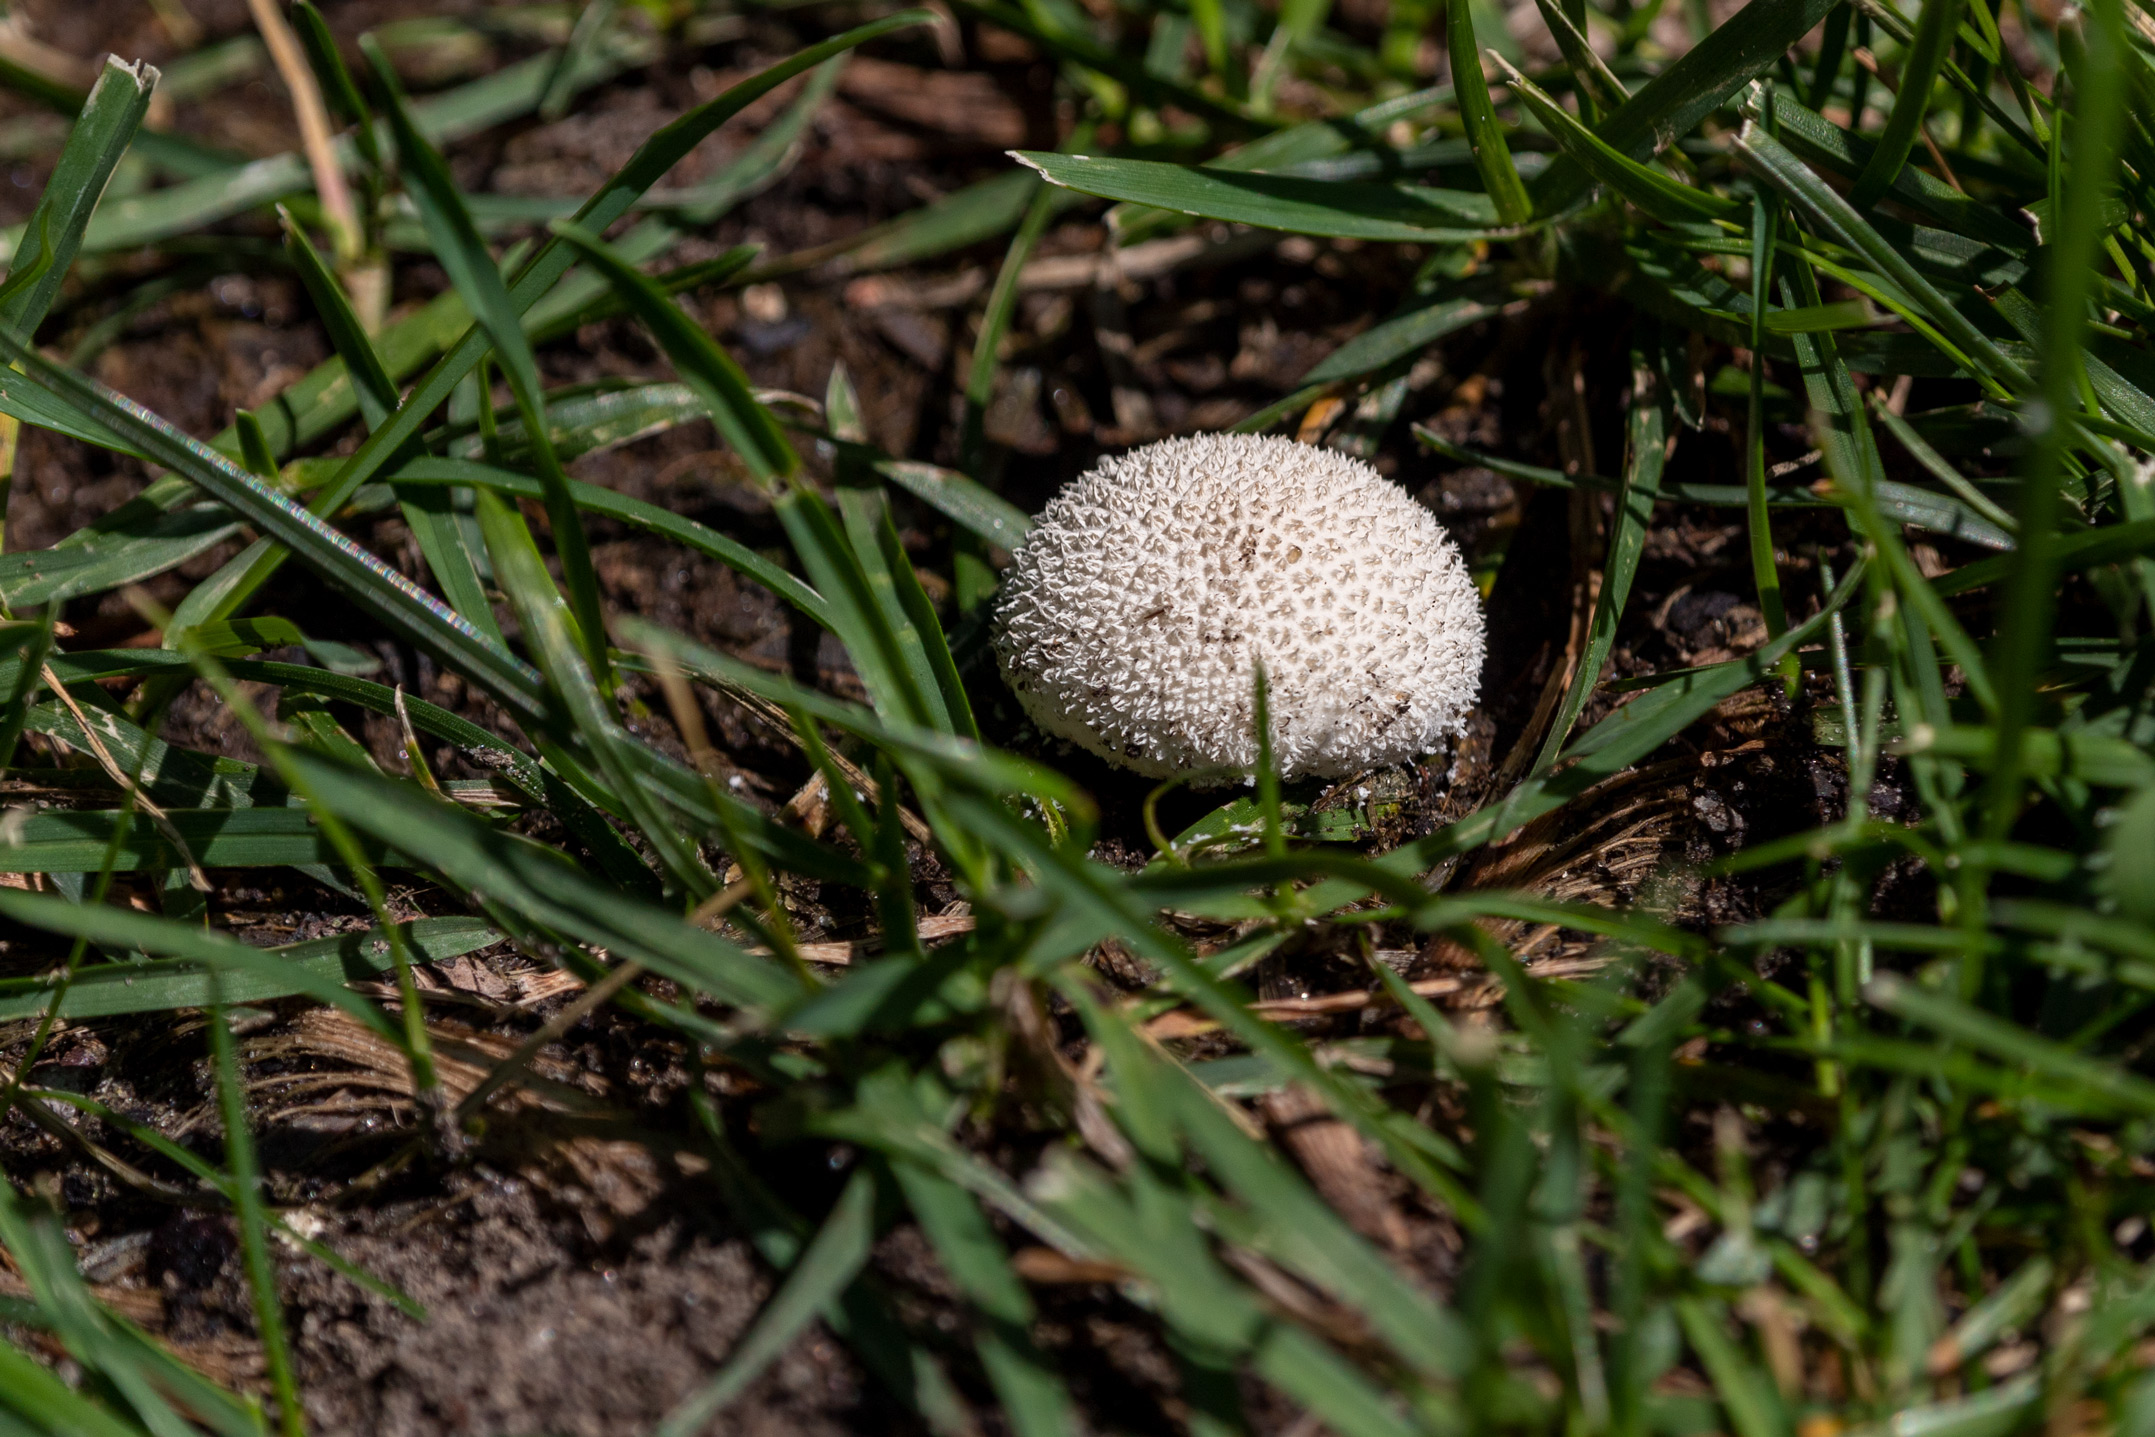 Small round mushroom with small spiky protrusions